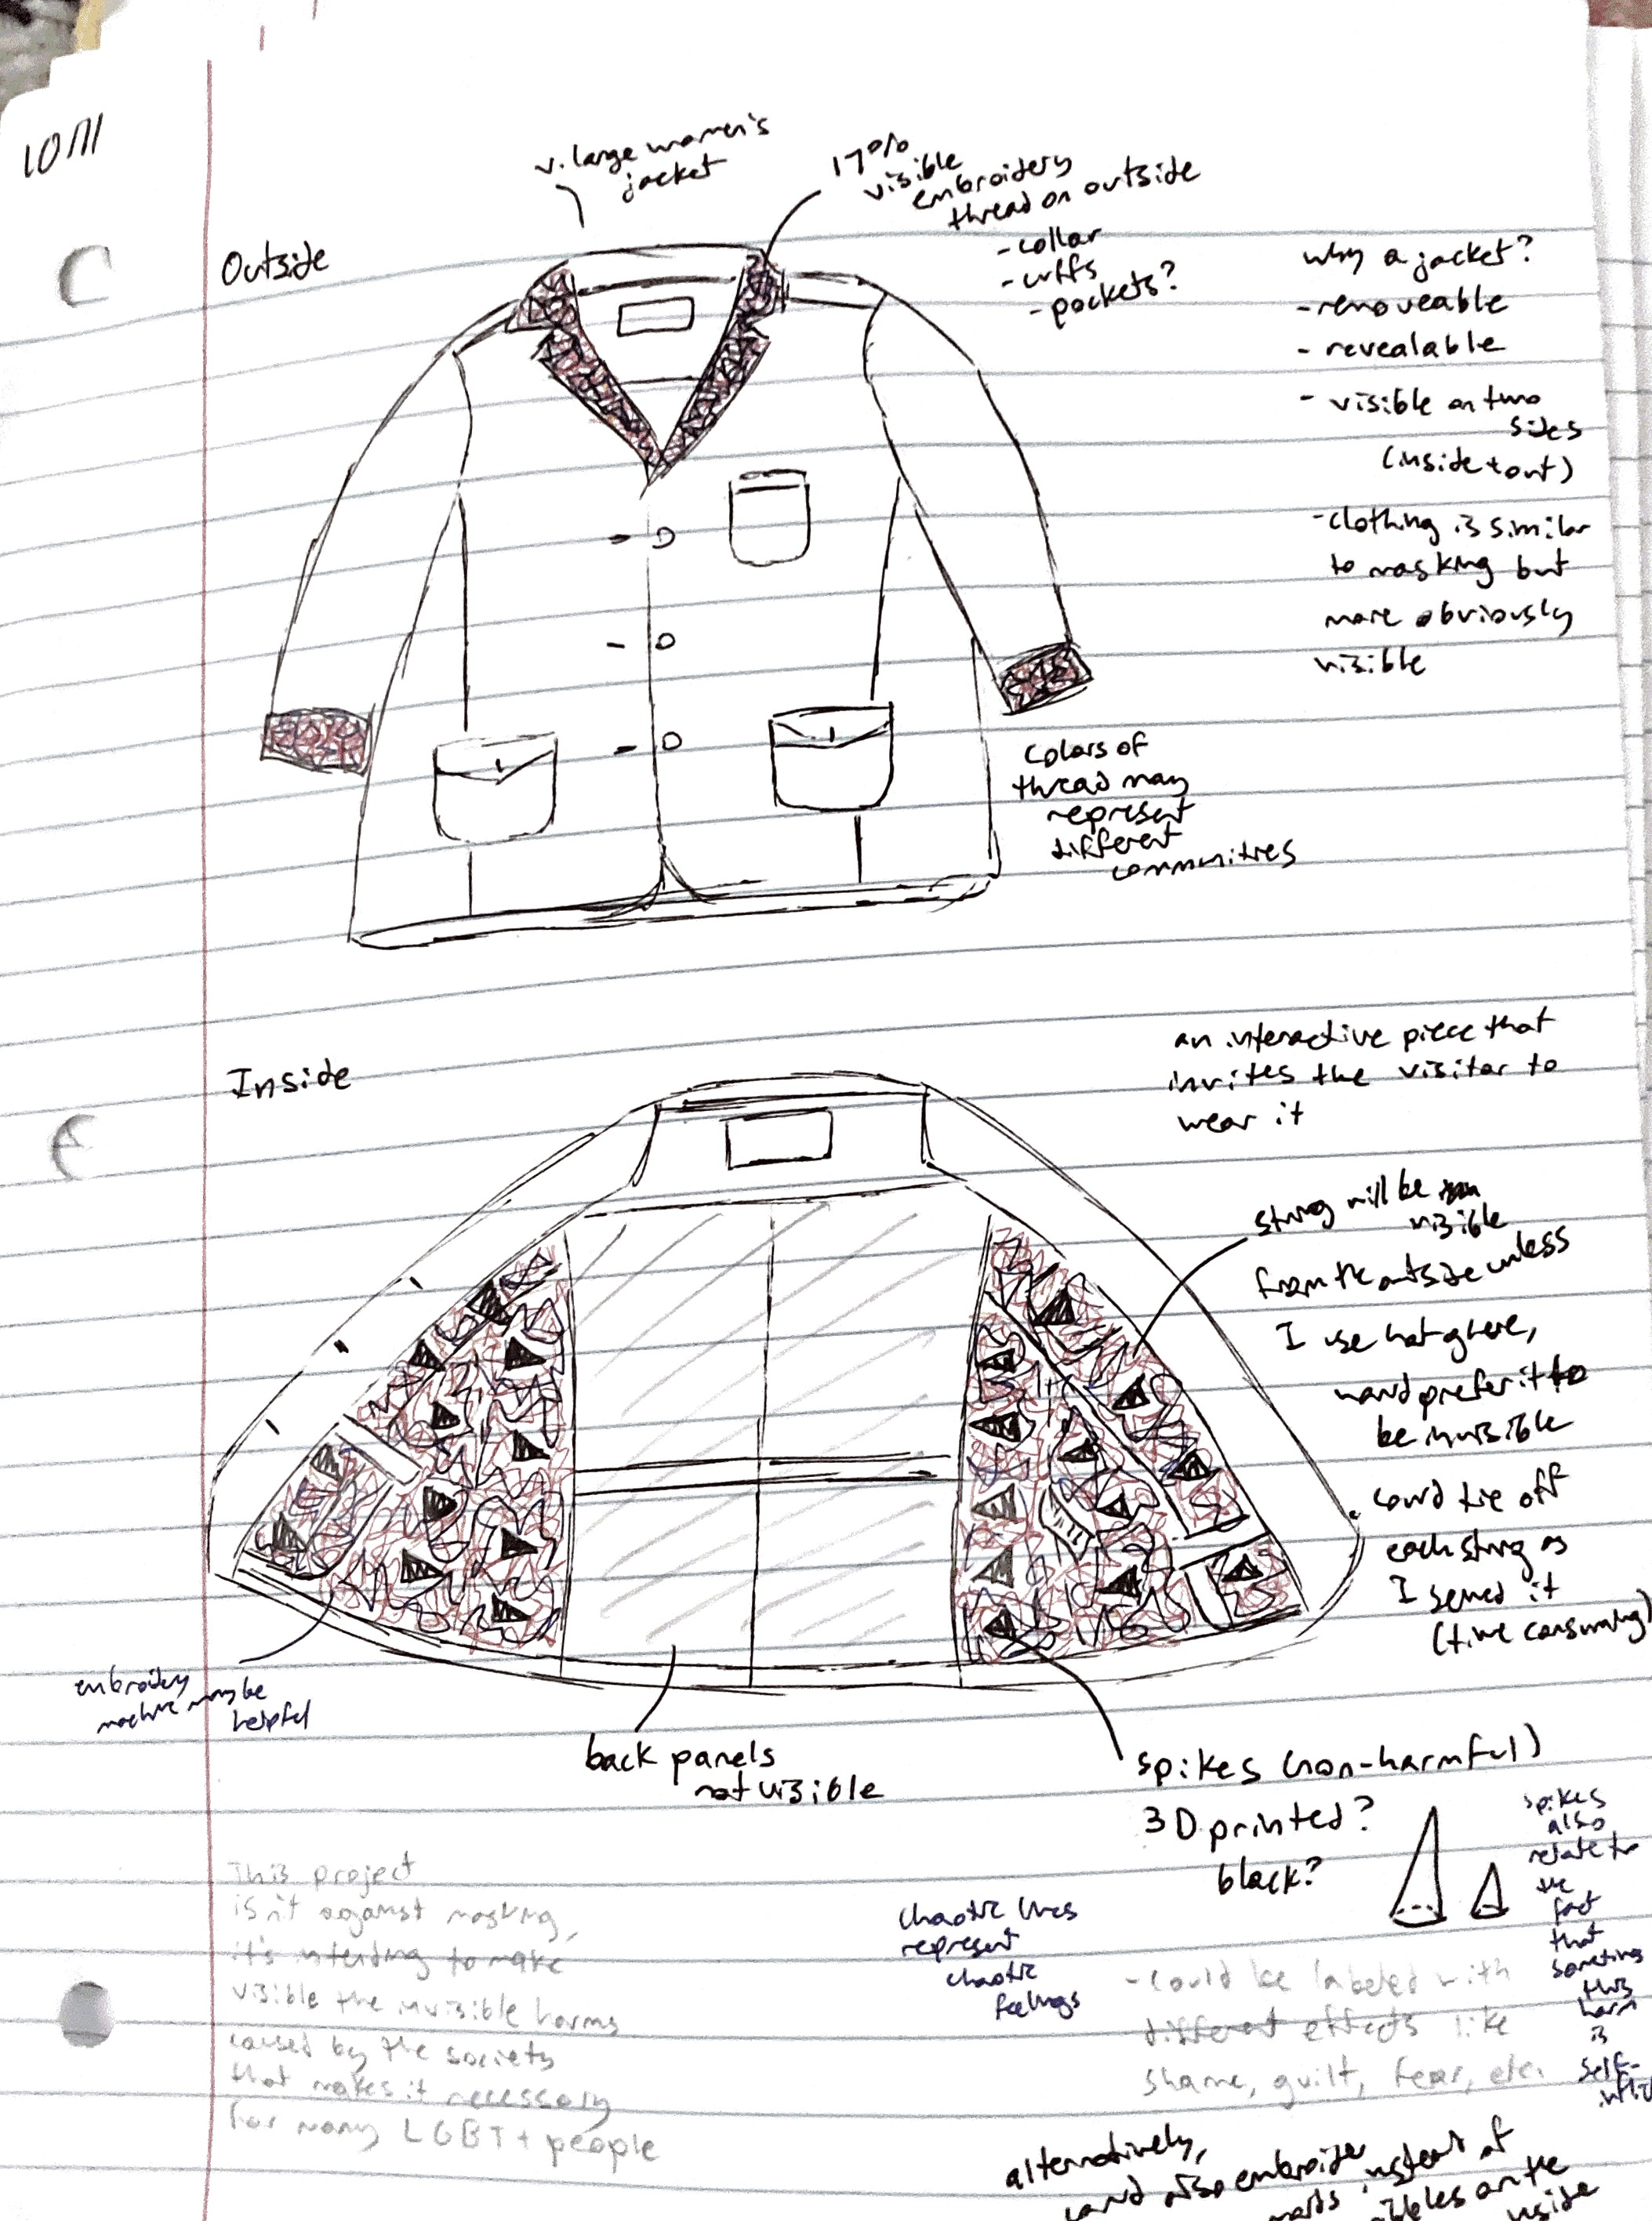 a sketch of the project plan, showing the outside and the inside of the jacket. lots of notes surround the designs. the designs show embroidered lapels and cuffs, and spikes on the inside of the jacket.